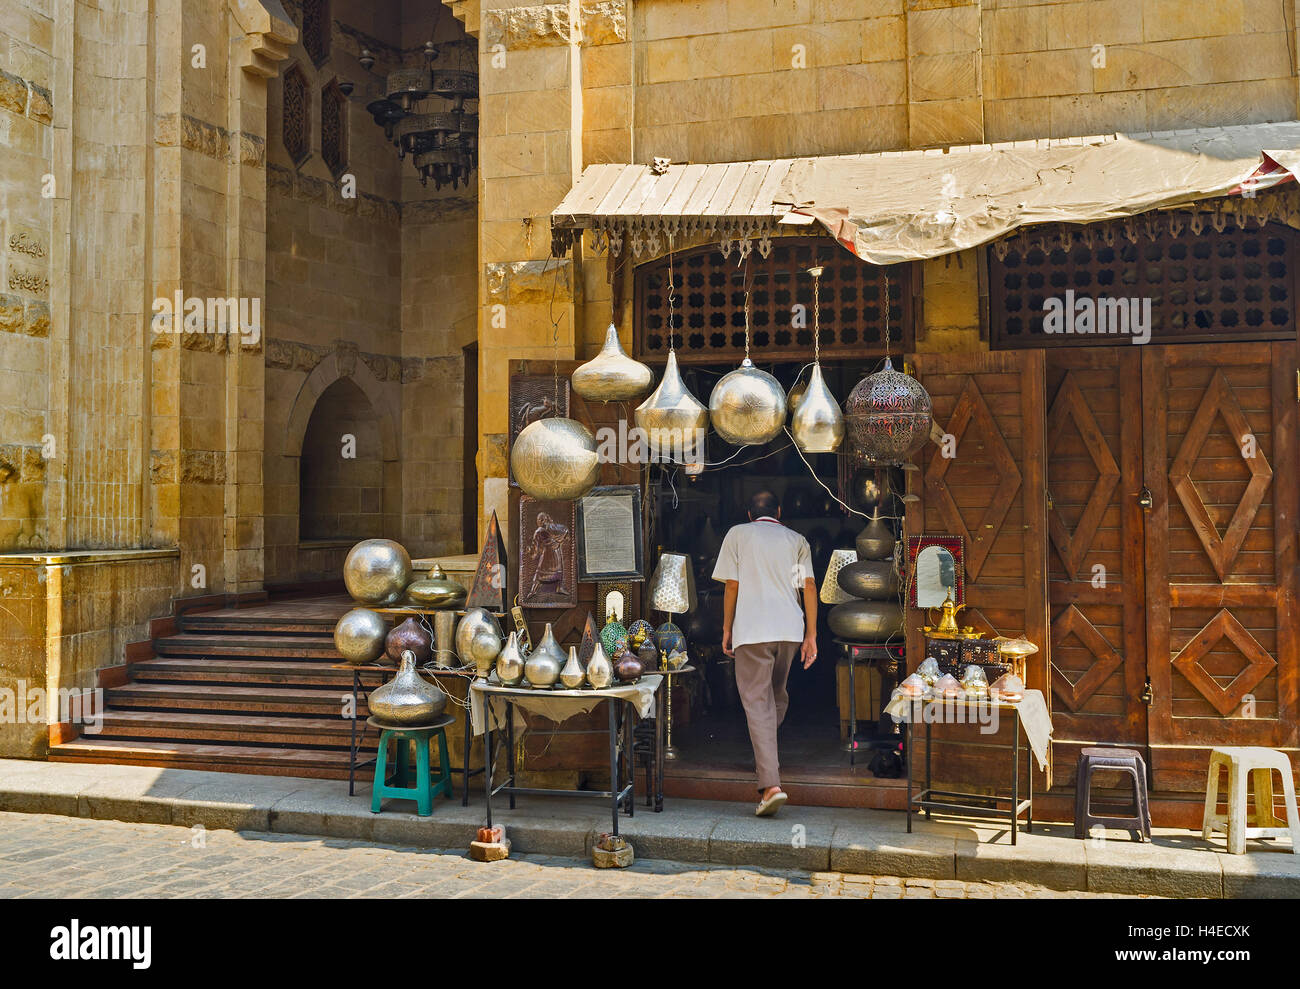 The market stall with numerous arabian lights on Al-Muizz street in Cairo, Egypt. Stock Photo